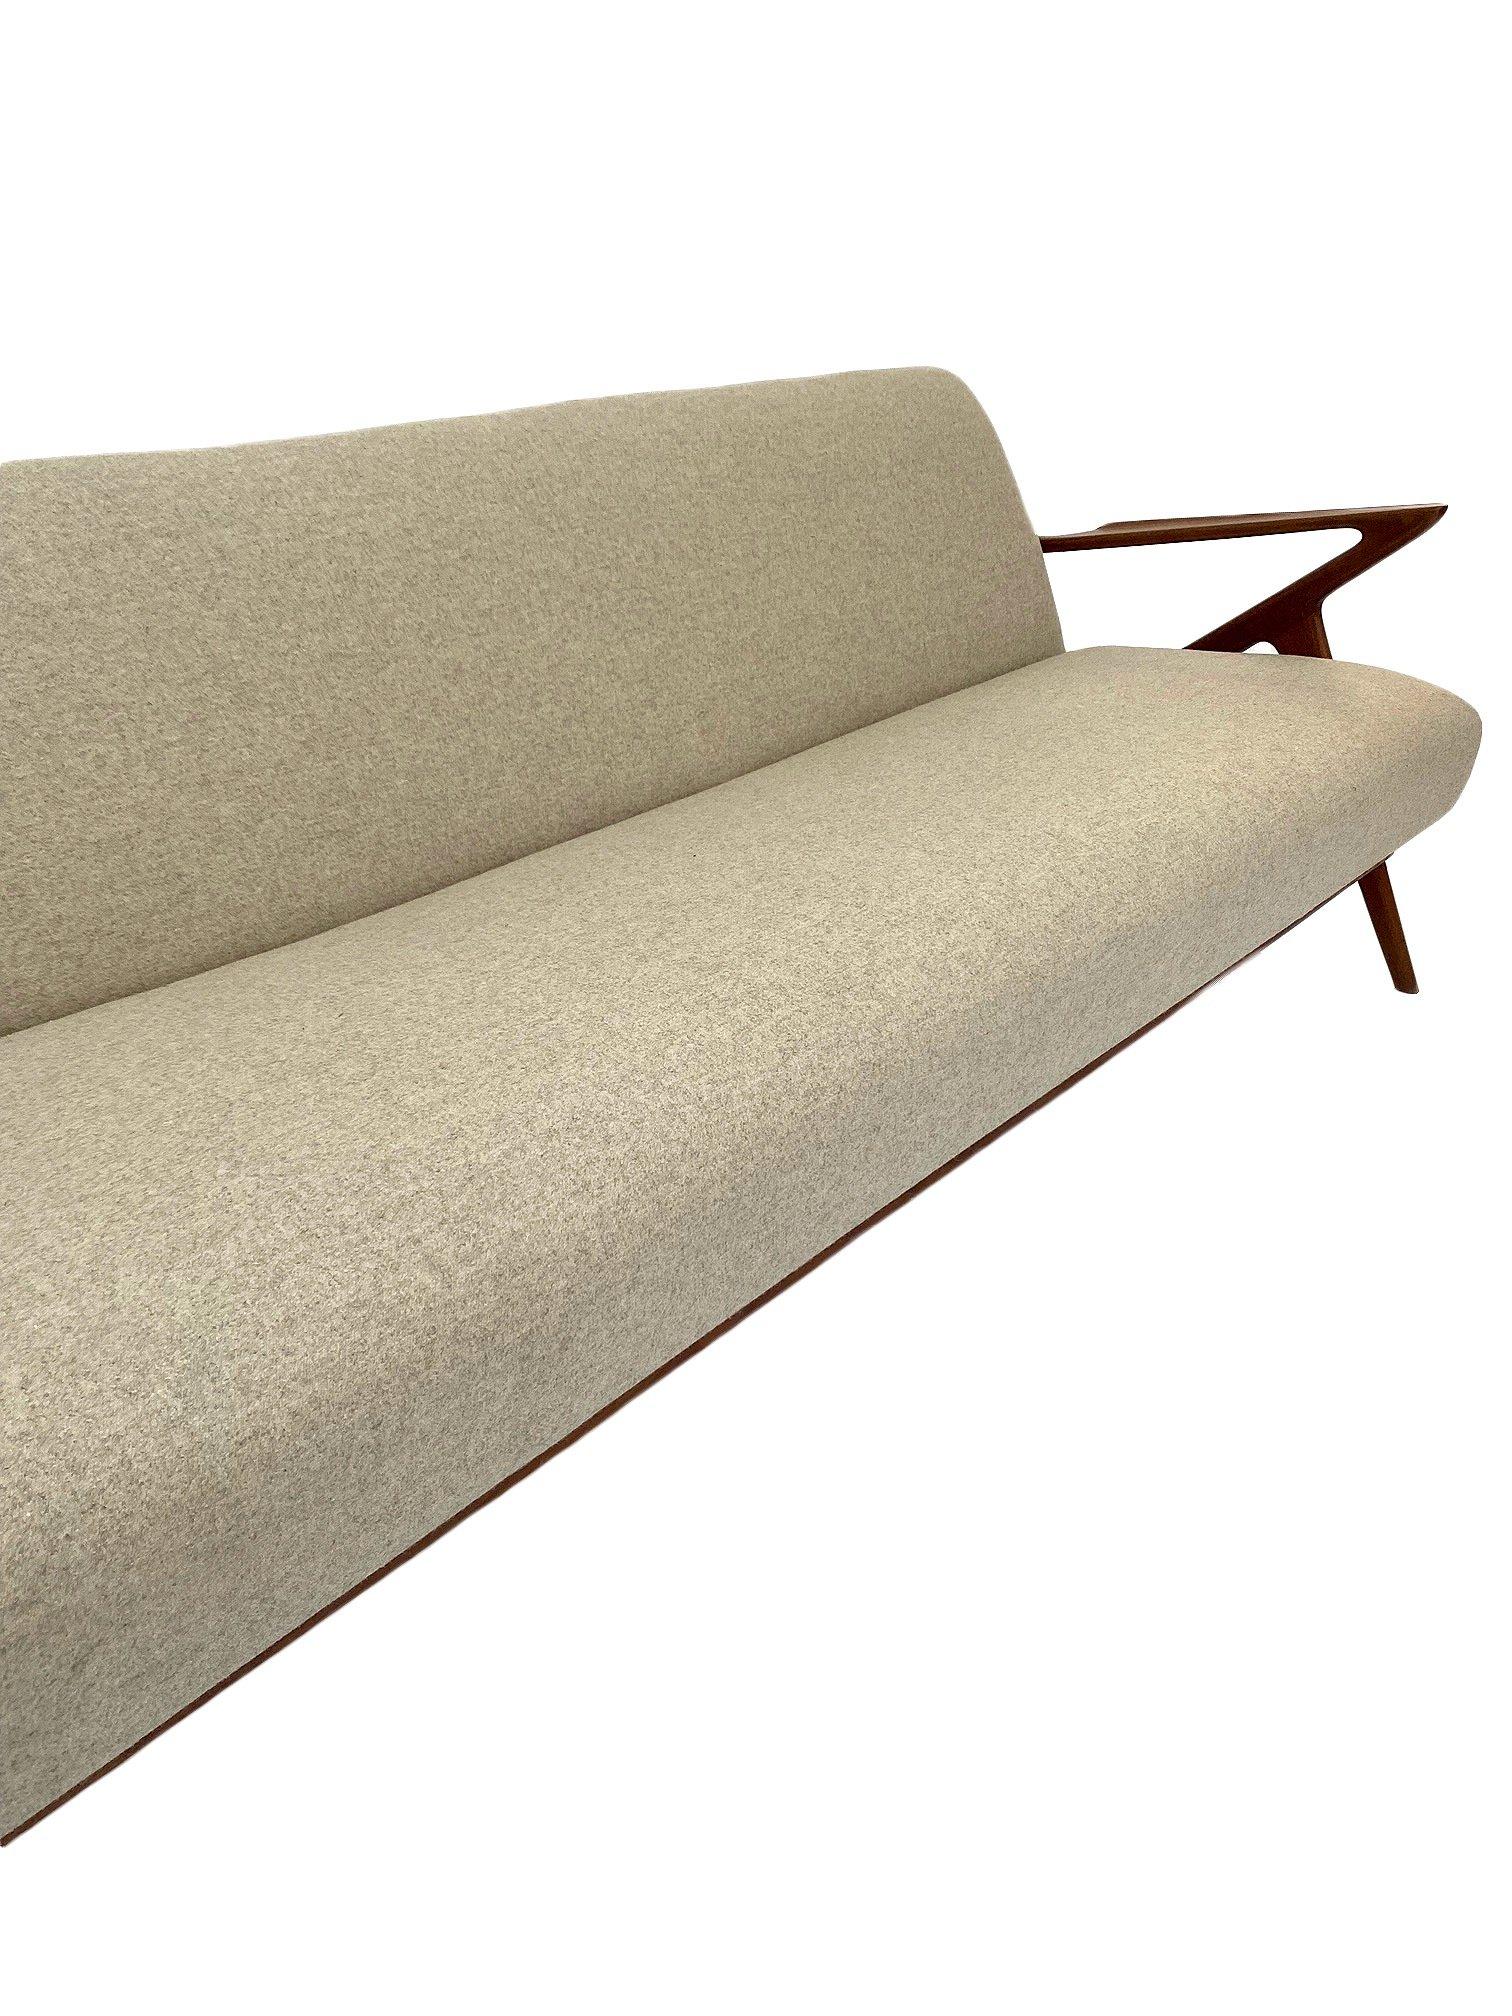 Poul Jensen Model 'Z' Cream Wool and Teak 3 Seater Sofabed for Selig Ope Danish 8